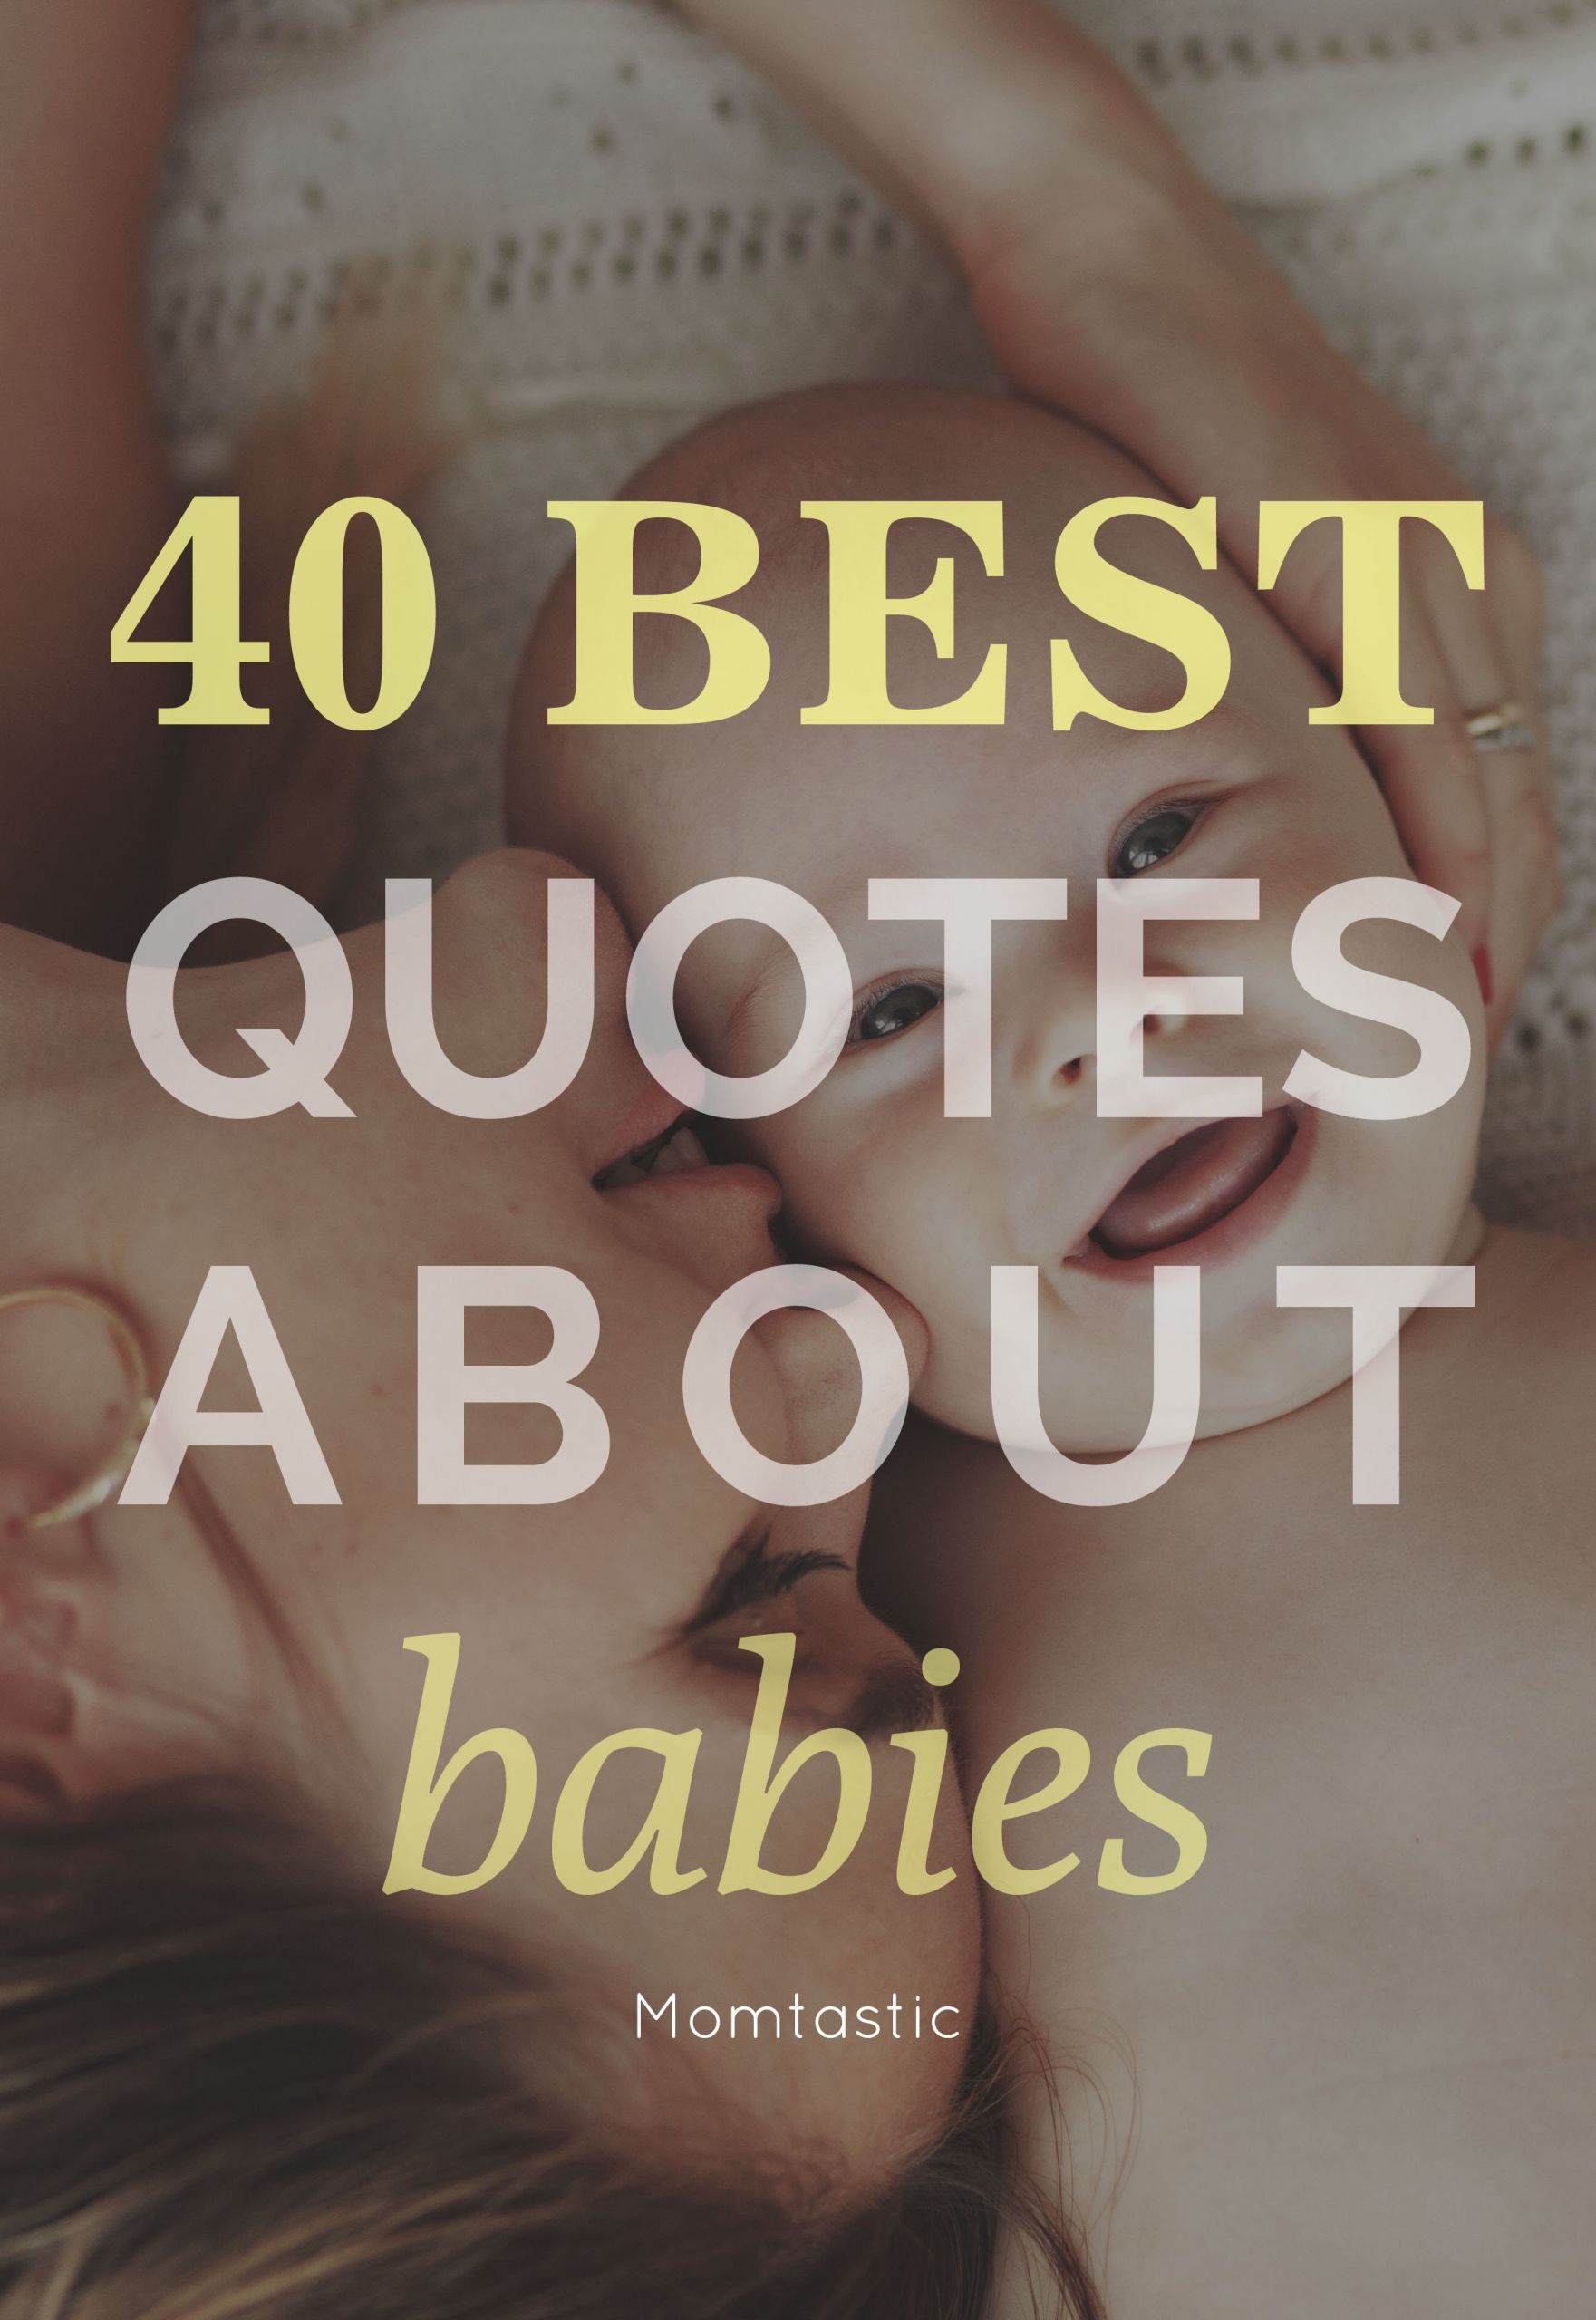 Baby Quotes Images
 40 Best Quotes About Babies